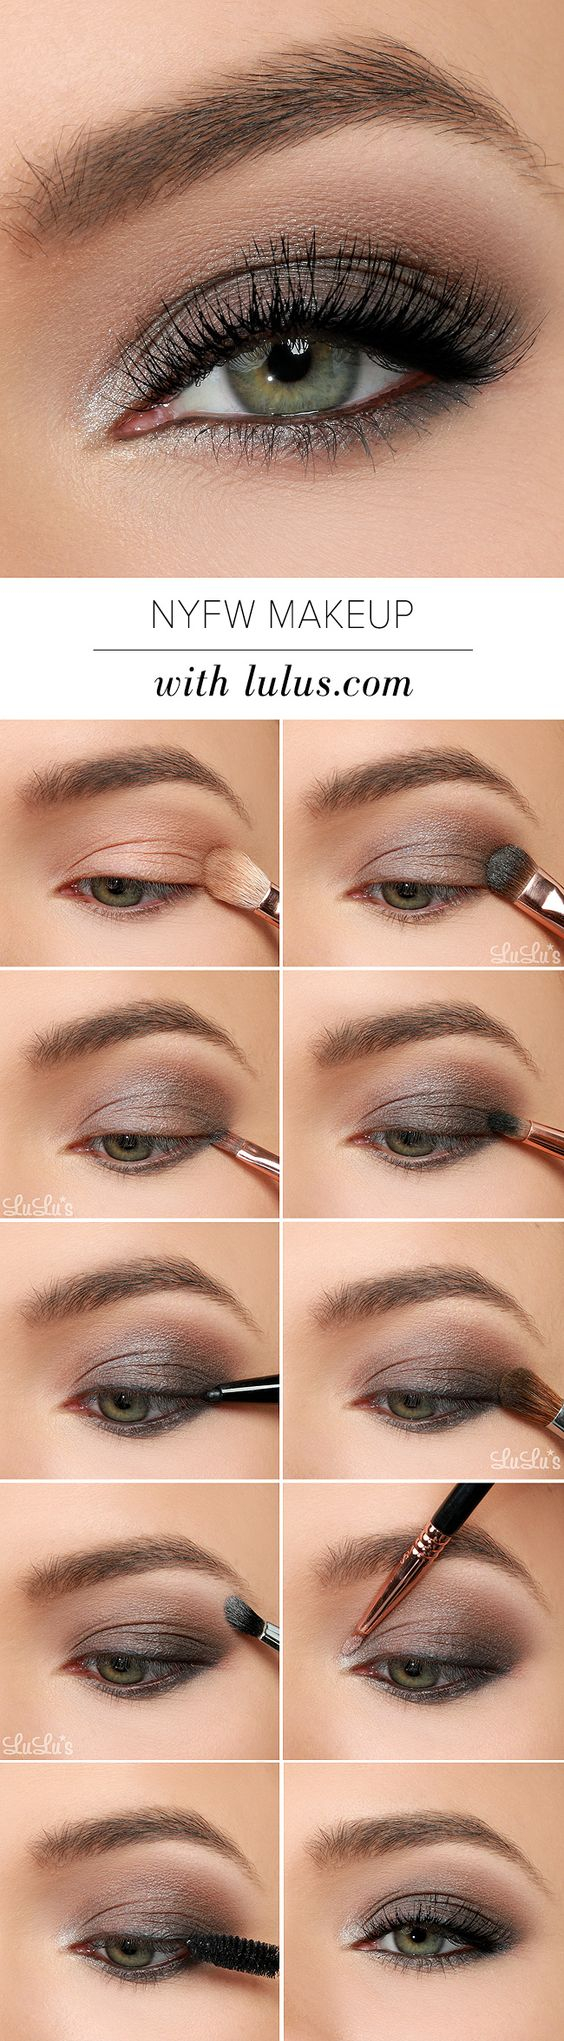 Natural Makeup Look For Green Eyes 10 Great Eye Makeup Looks For Green Eyes Styles Weekly